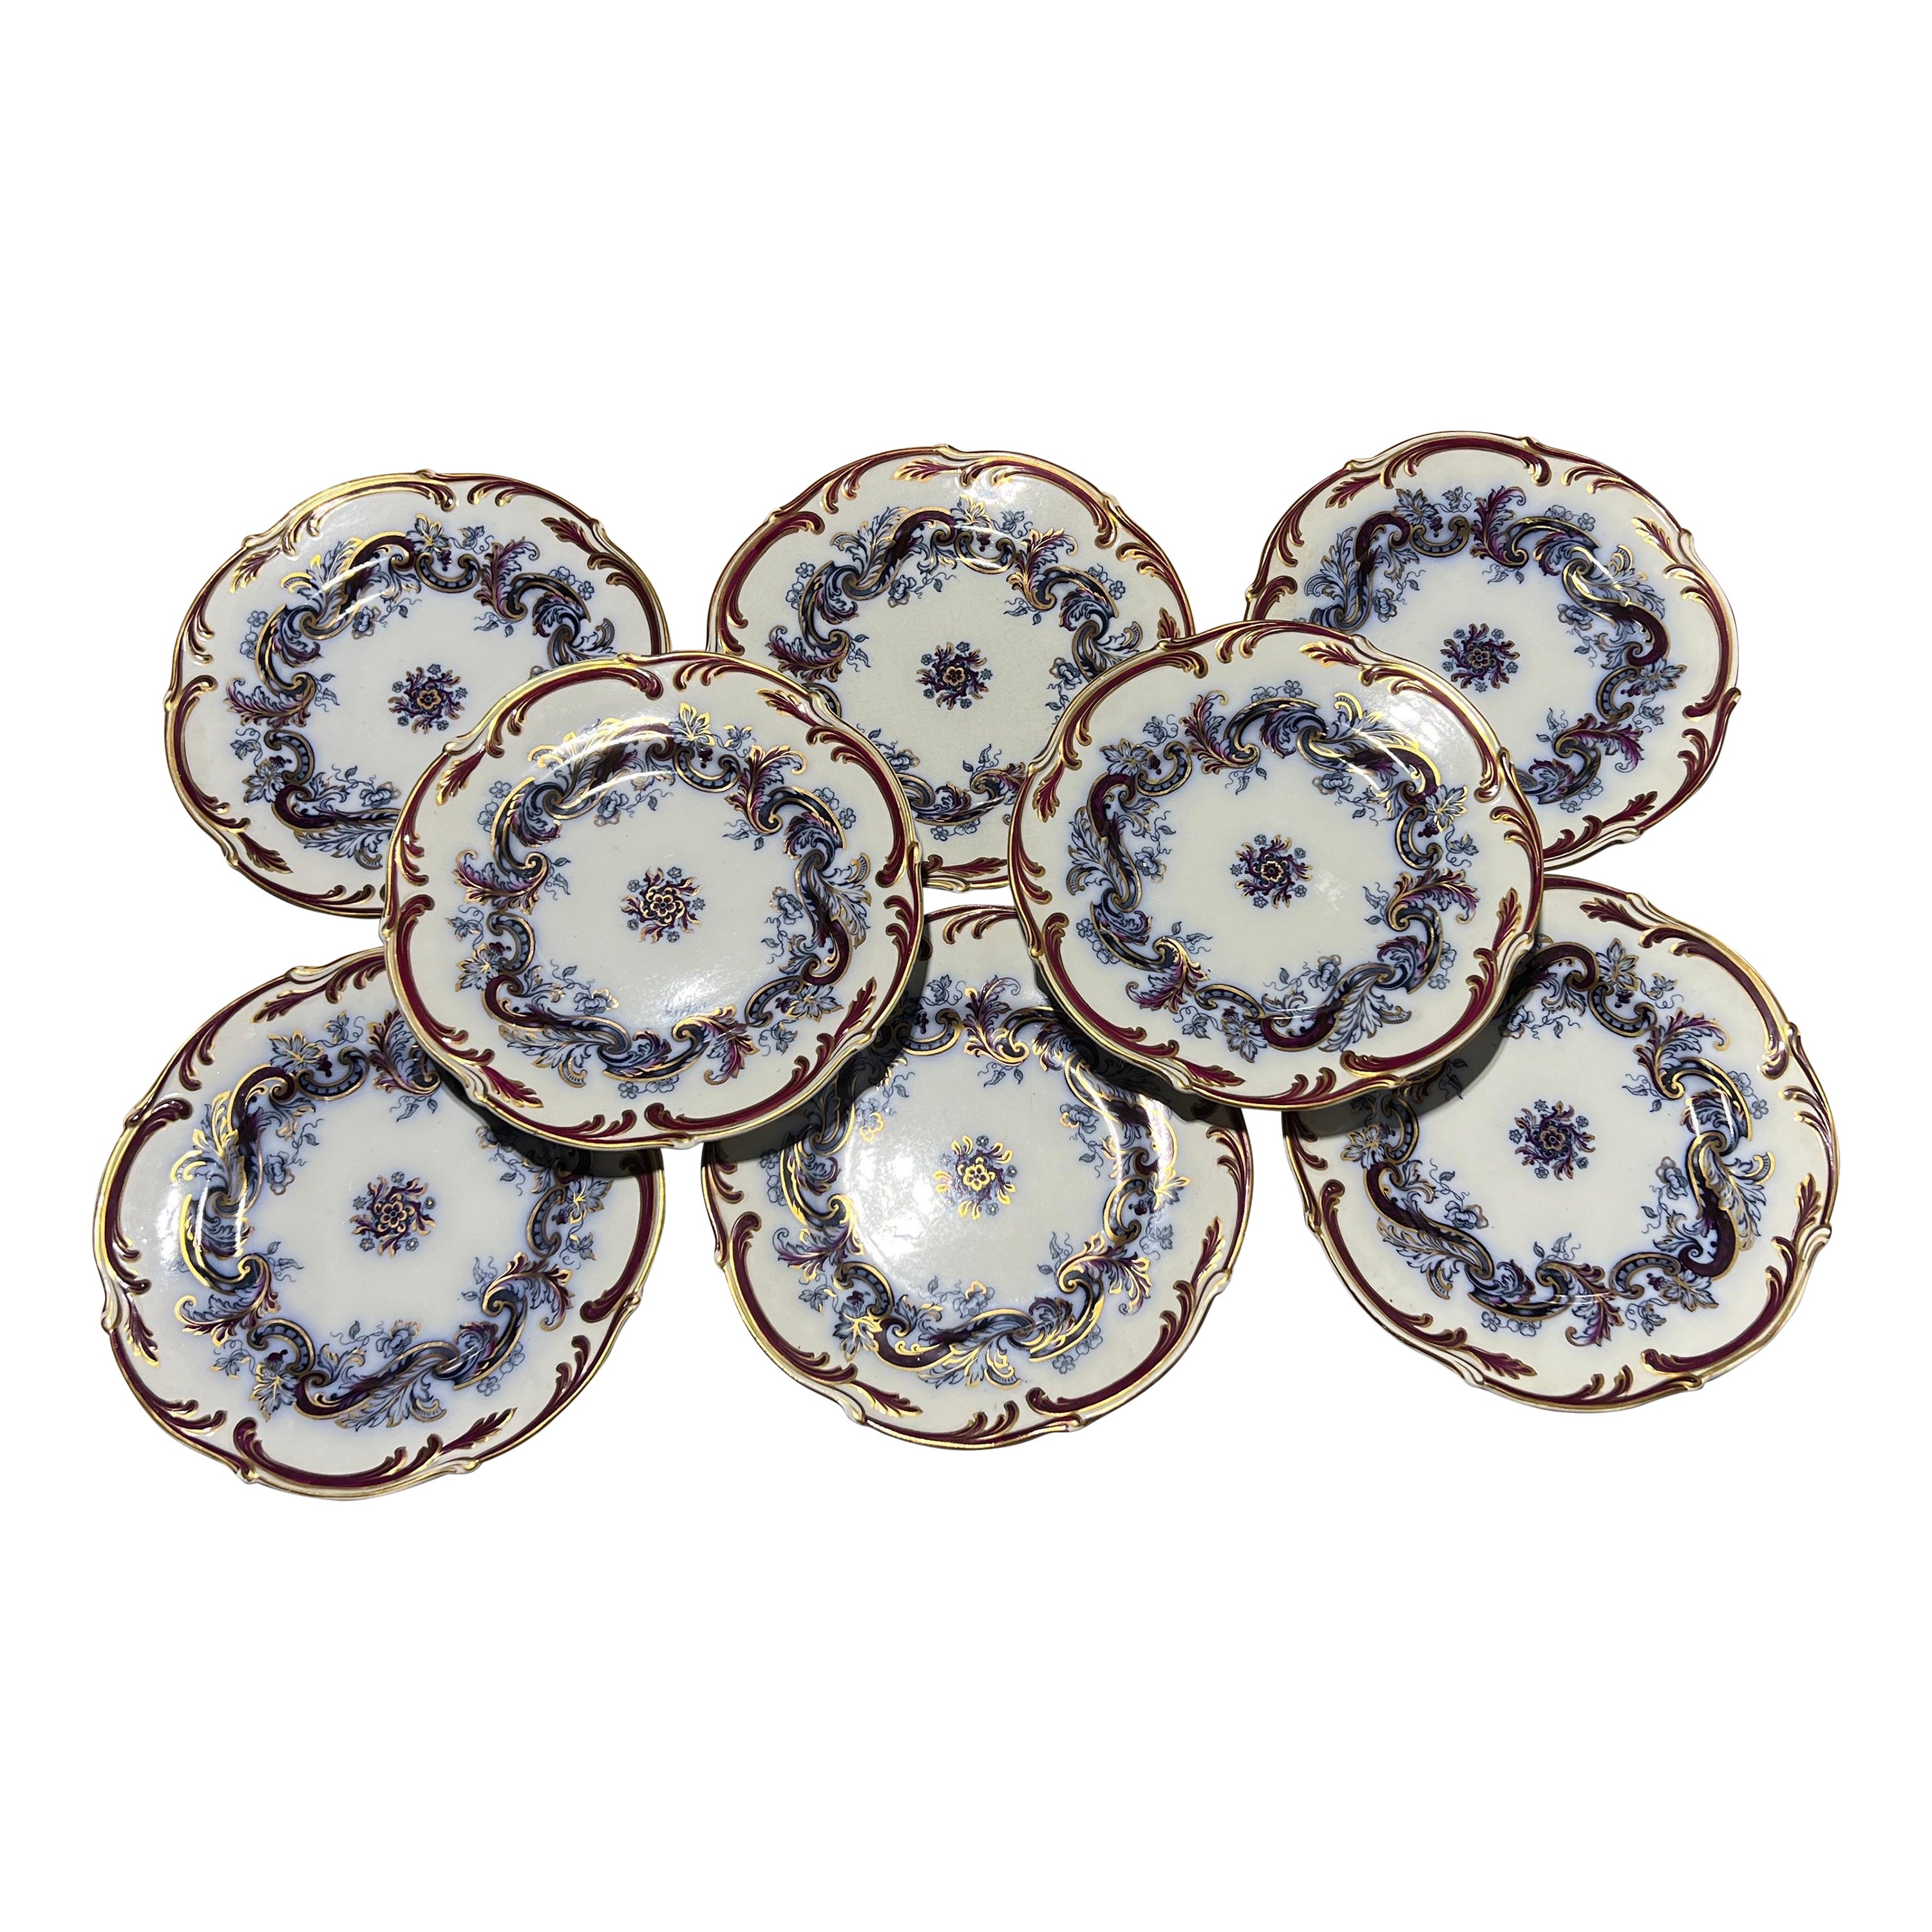 Set of 8 19th Century, English Ironstone Porcelain 9" Plates For Sale